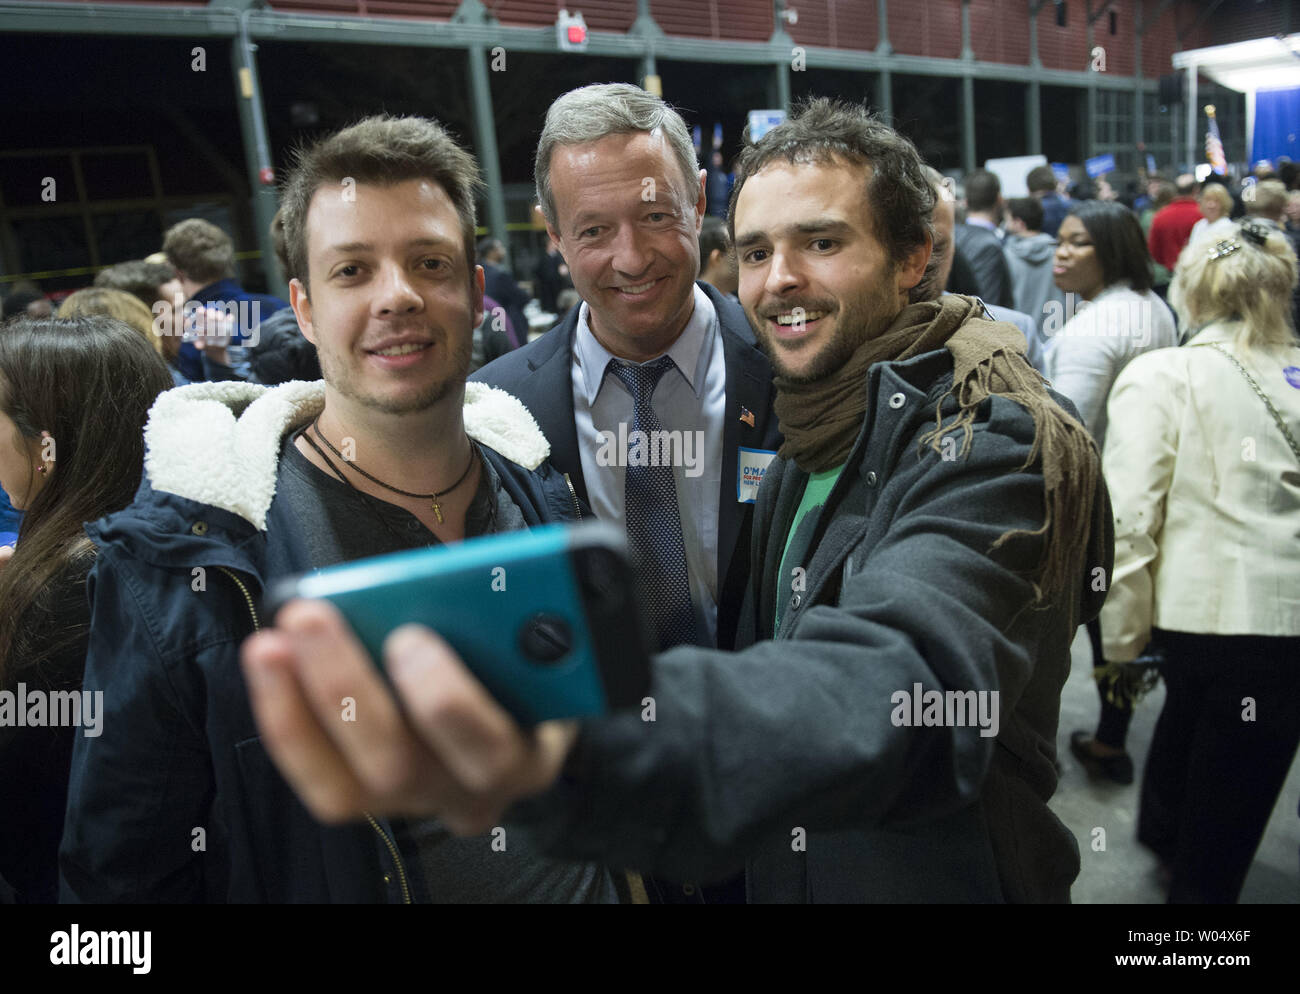 Democratic presidential candidate Martin O'Malley takes a selfie photo with attendees at the James Clyburn Fish Fry in Charleston, South Carolina on January 17, 2106. Photo by Kevin Dietsch/UPI Stock Photo